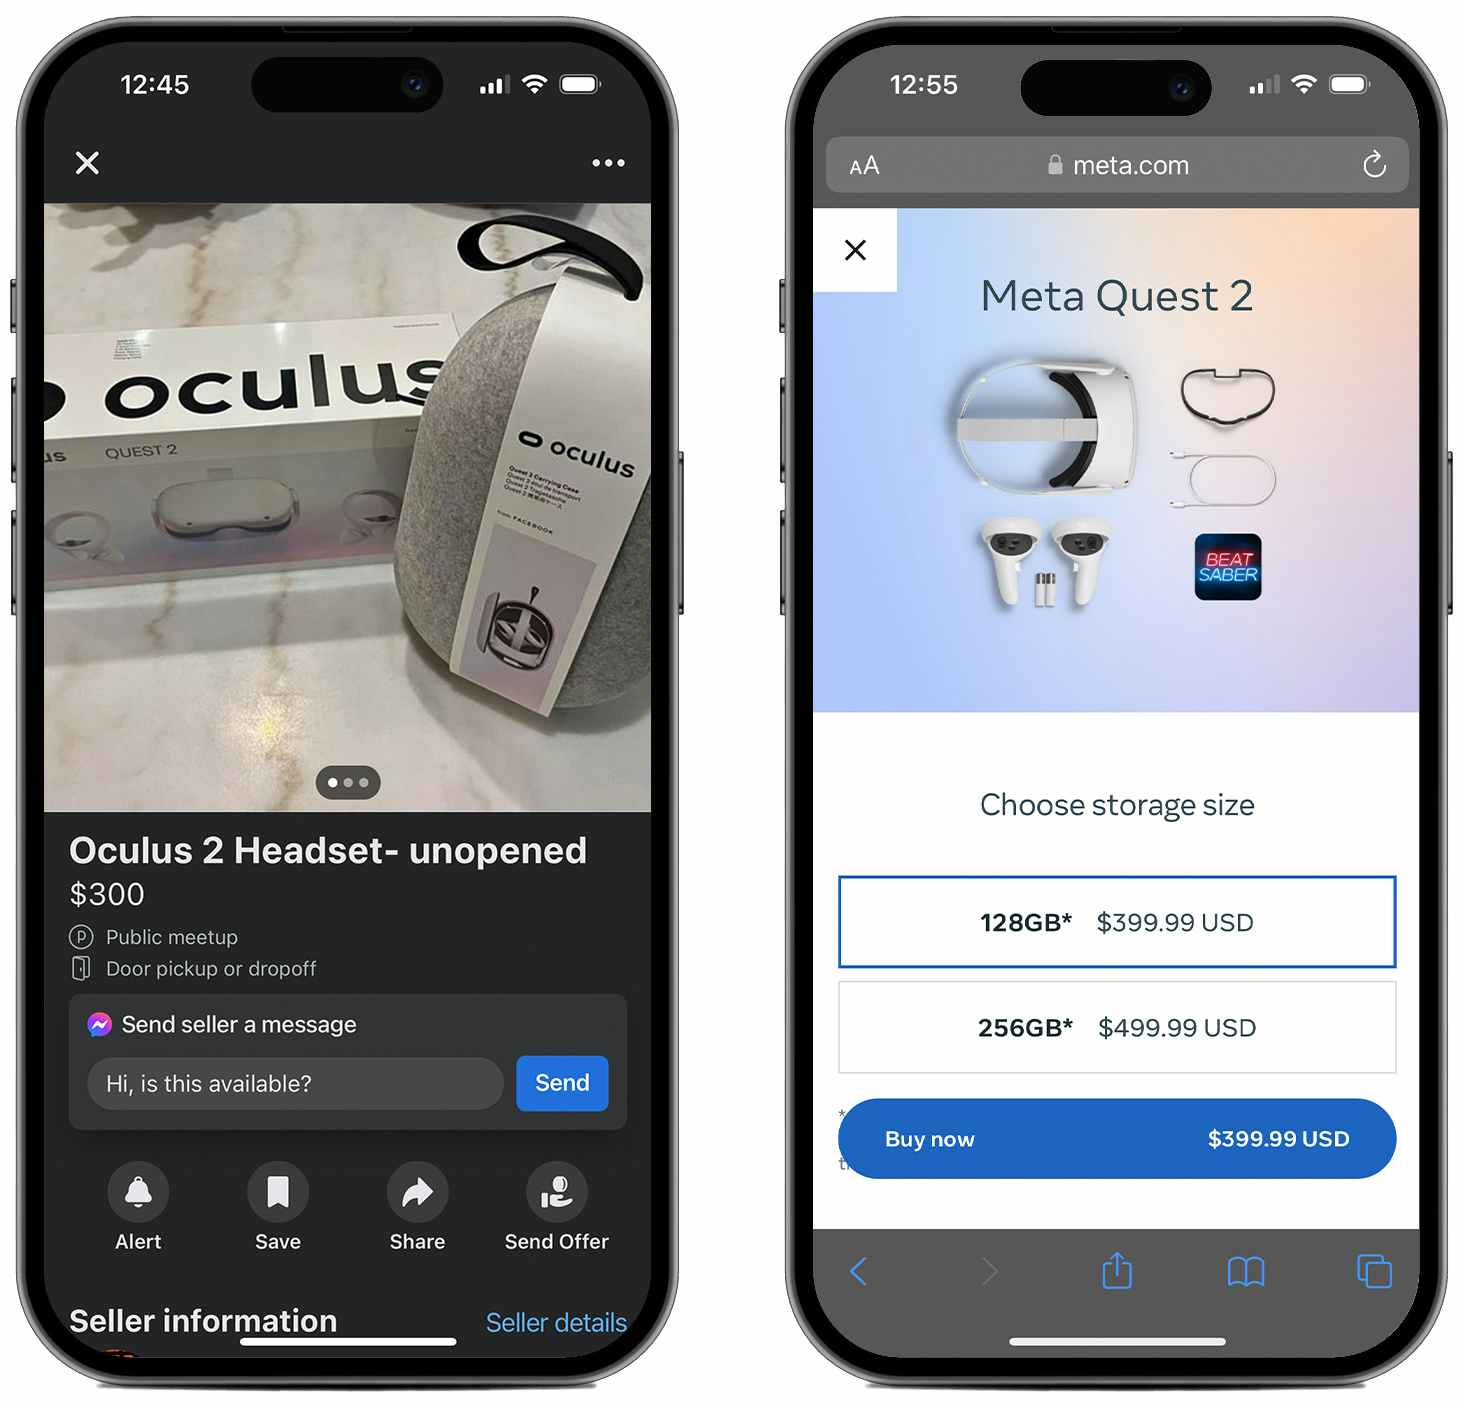 A graphic of two iPhones, one showing a listing for an Occulus Quest 2 VR headset unopened on Facebook Marketplace for $300 and the other showing the listing price on the Meta website $399.99